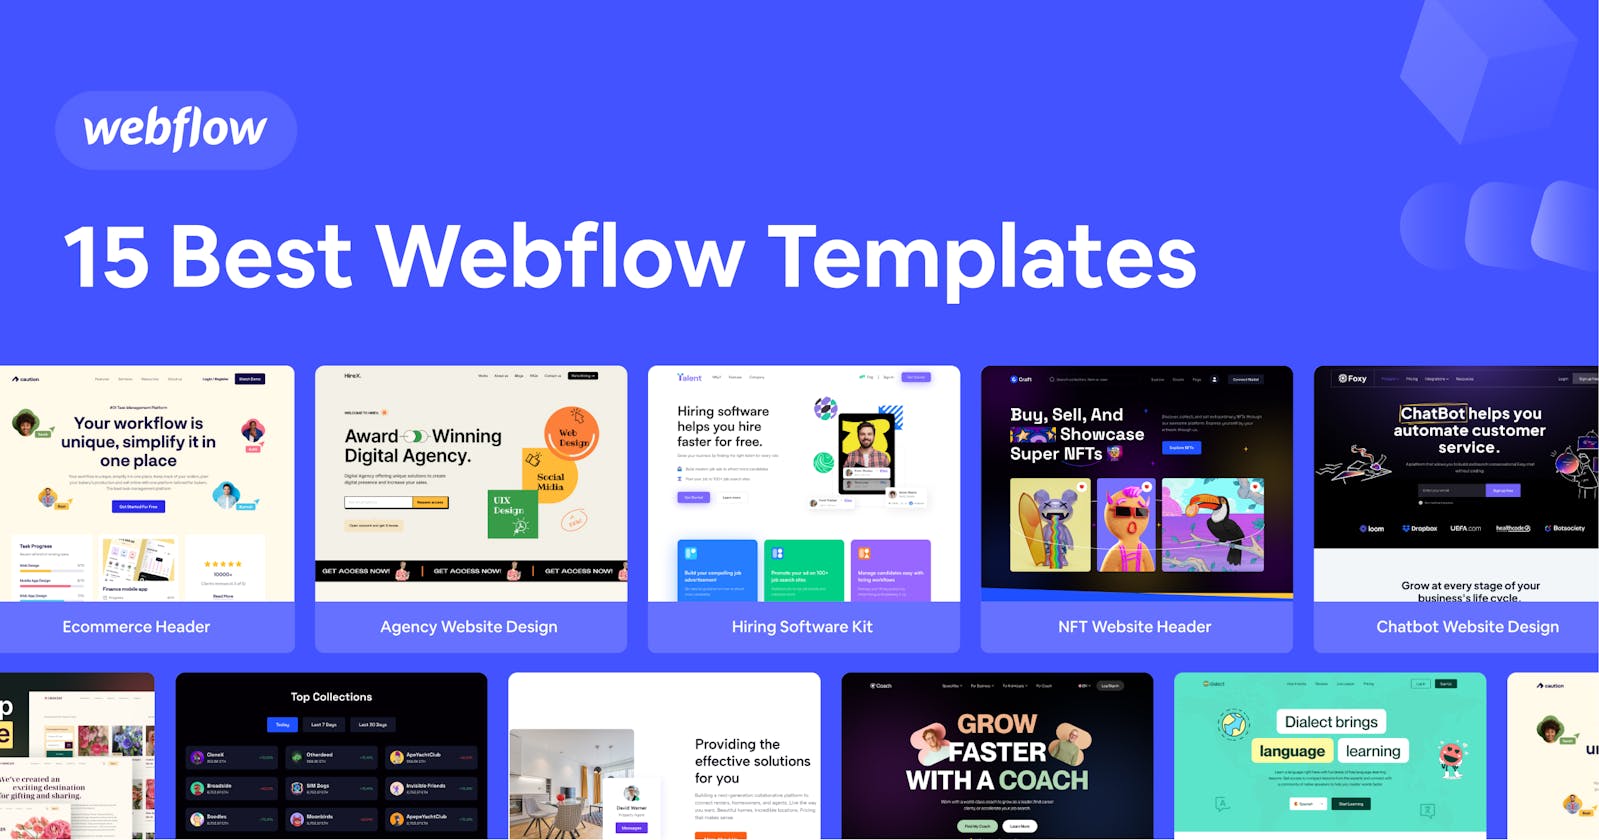 15 Best Webflow Templates for Different Types of Websites